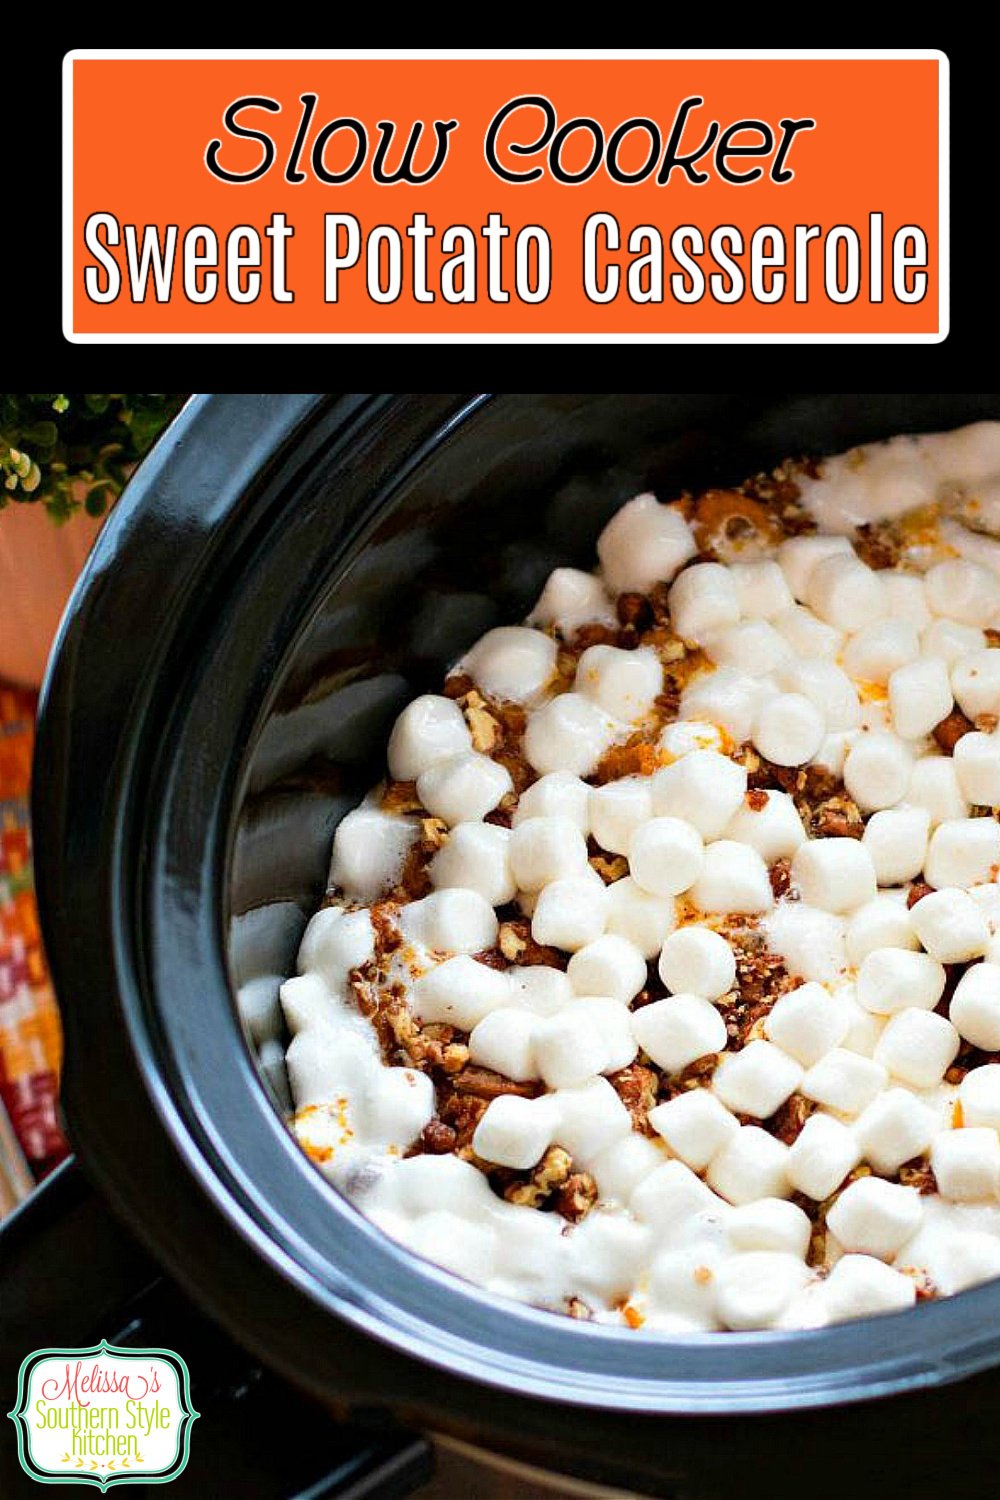 Free-up oven space and make this insanely delicious Sweet Potato Casserole in your slow cooker! #sweetpotatocasserole #sweetpotatoes #crockpotrecipes #slowcookedsweetpotatocasserole #casserolerecipes #thanksgivingrecipes #potatorecipes #southernfood #southernrecipes #holidaysidedishes via @melissasssk